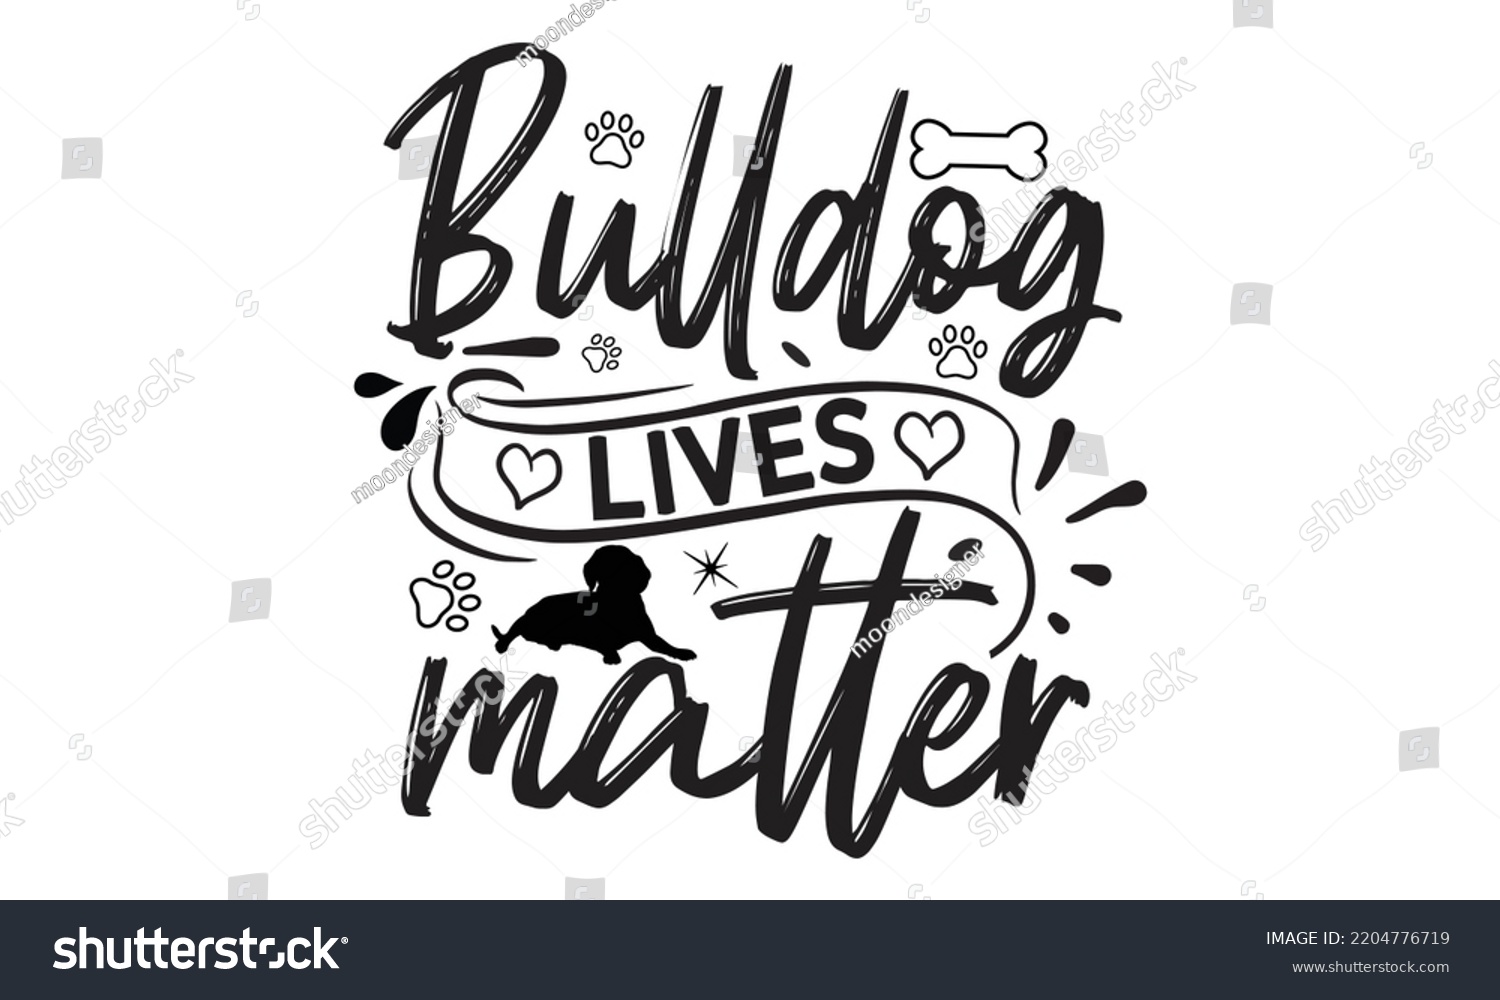 SVG of Bulldog lives matter  - Bullodog T-shirt and SVG Design,  Dog lover t shirt design gift for women, typography design, can you download this Design, svg Files for Cutting and Silhouette EPS, 10 svg